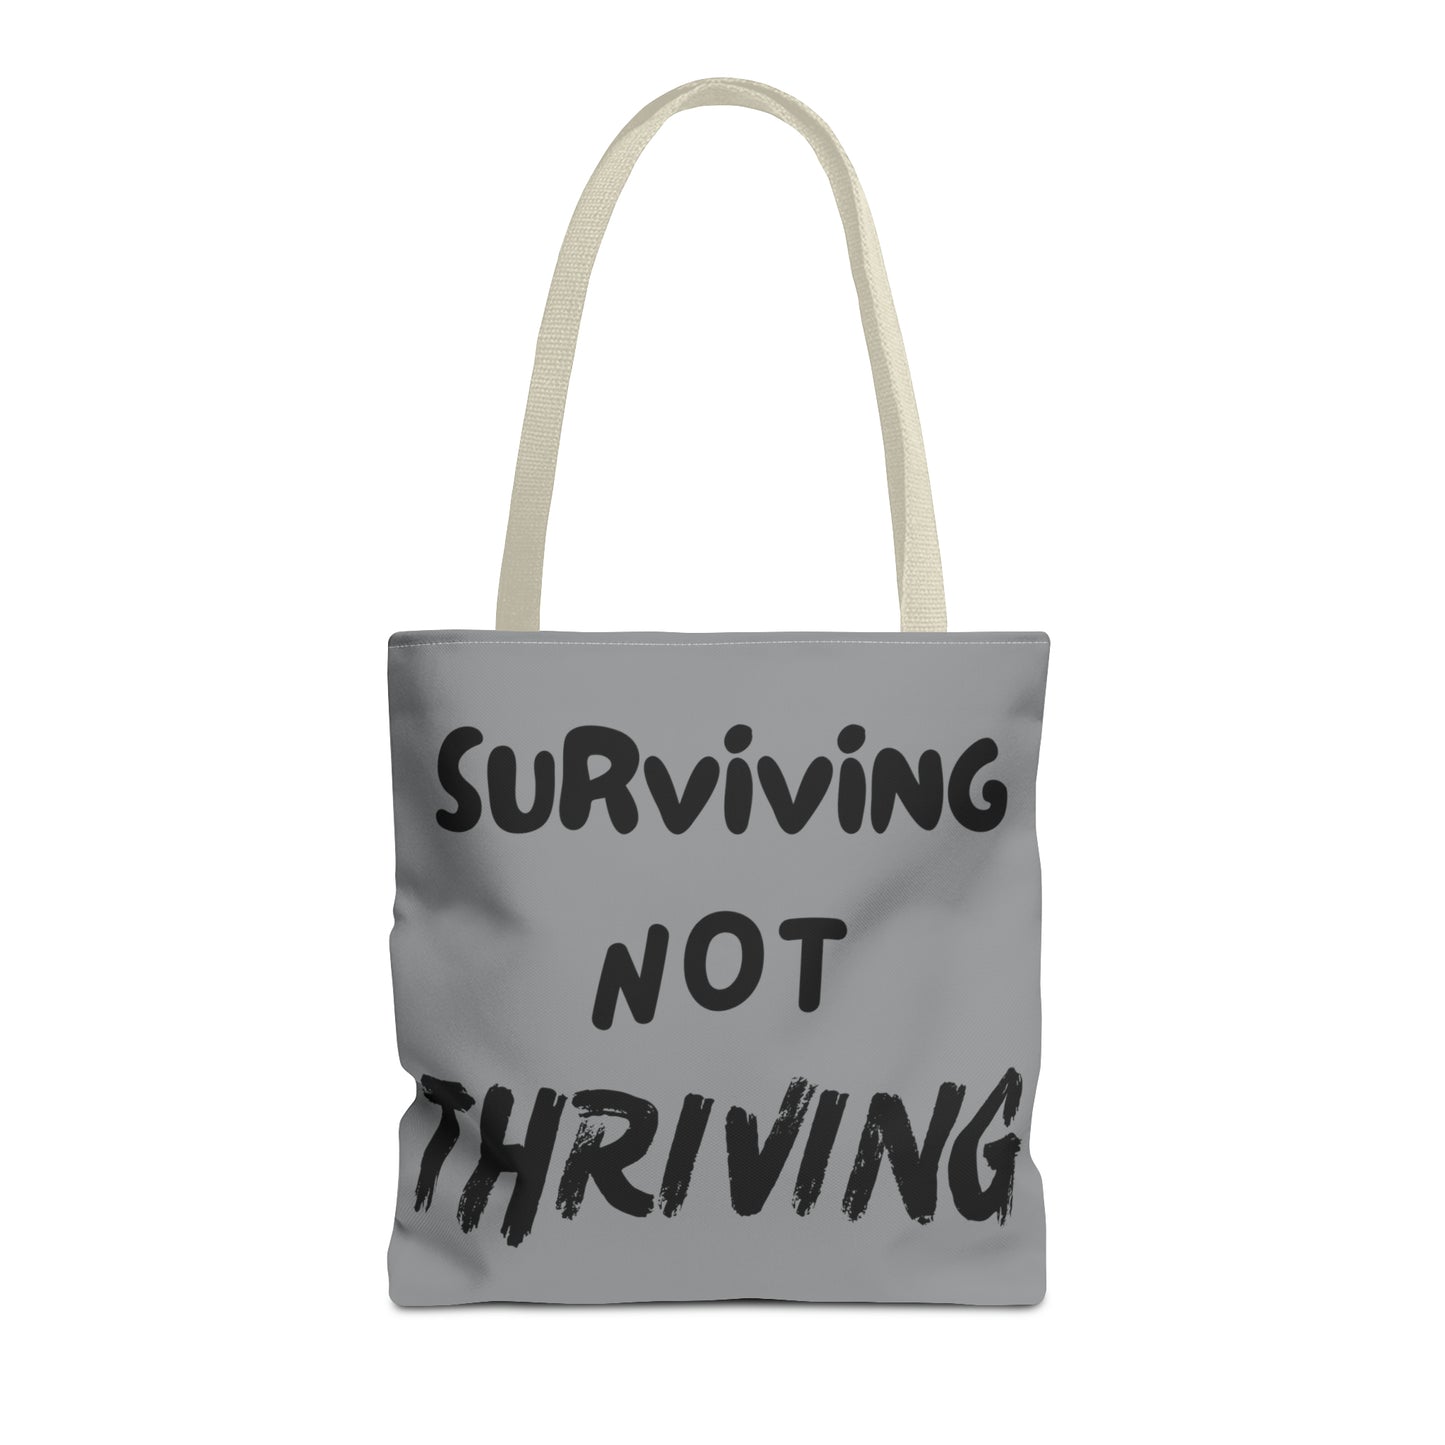 Surviving NOT Thriving - Gray Tote Bag (AOP)